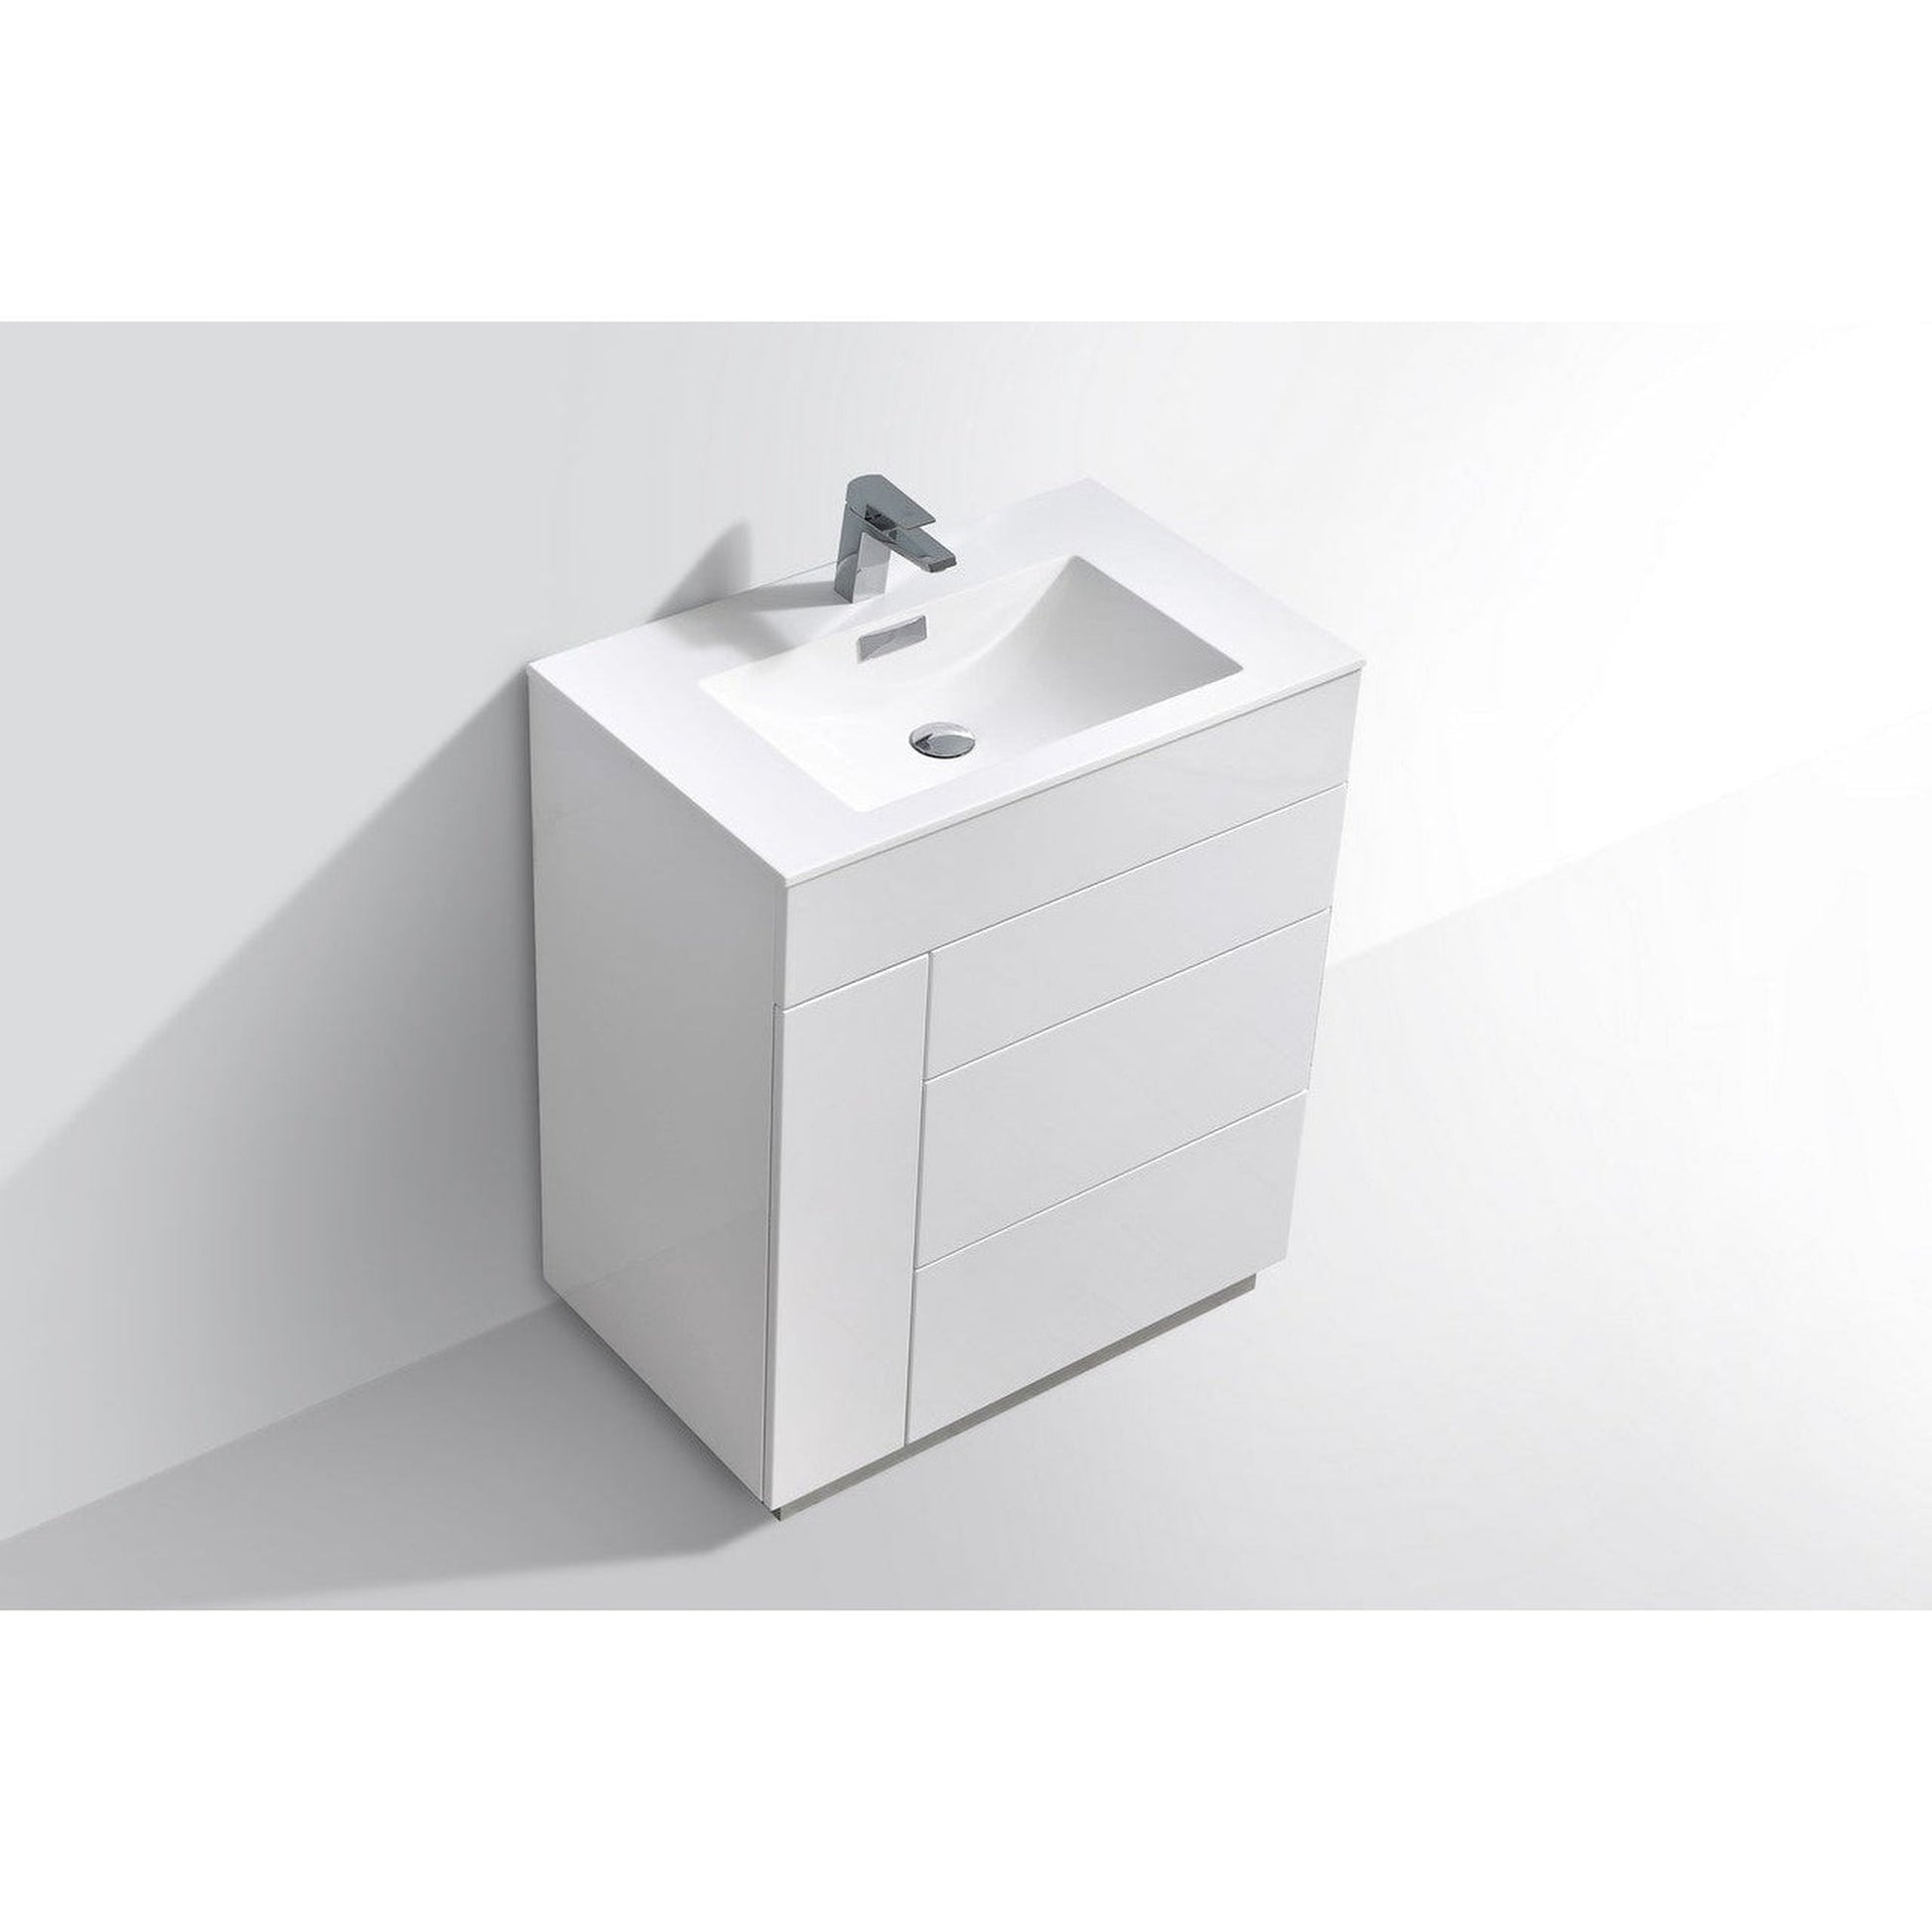 KubeBath Milano 30" High Gloss White Freestanding Modern Bathroom Vanity With Aluminum Kick Plate & Acrylic Composite Integrated Sink With Overflow and 30" White Framed Mirror With Shelf